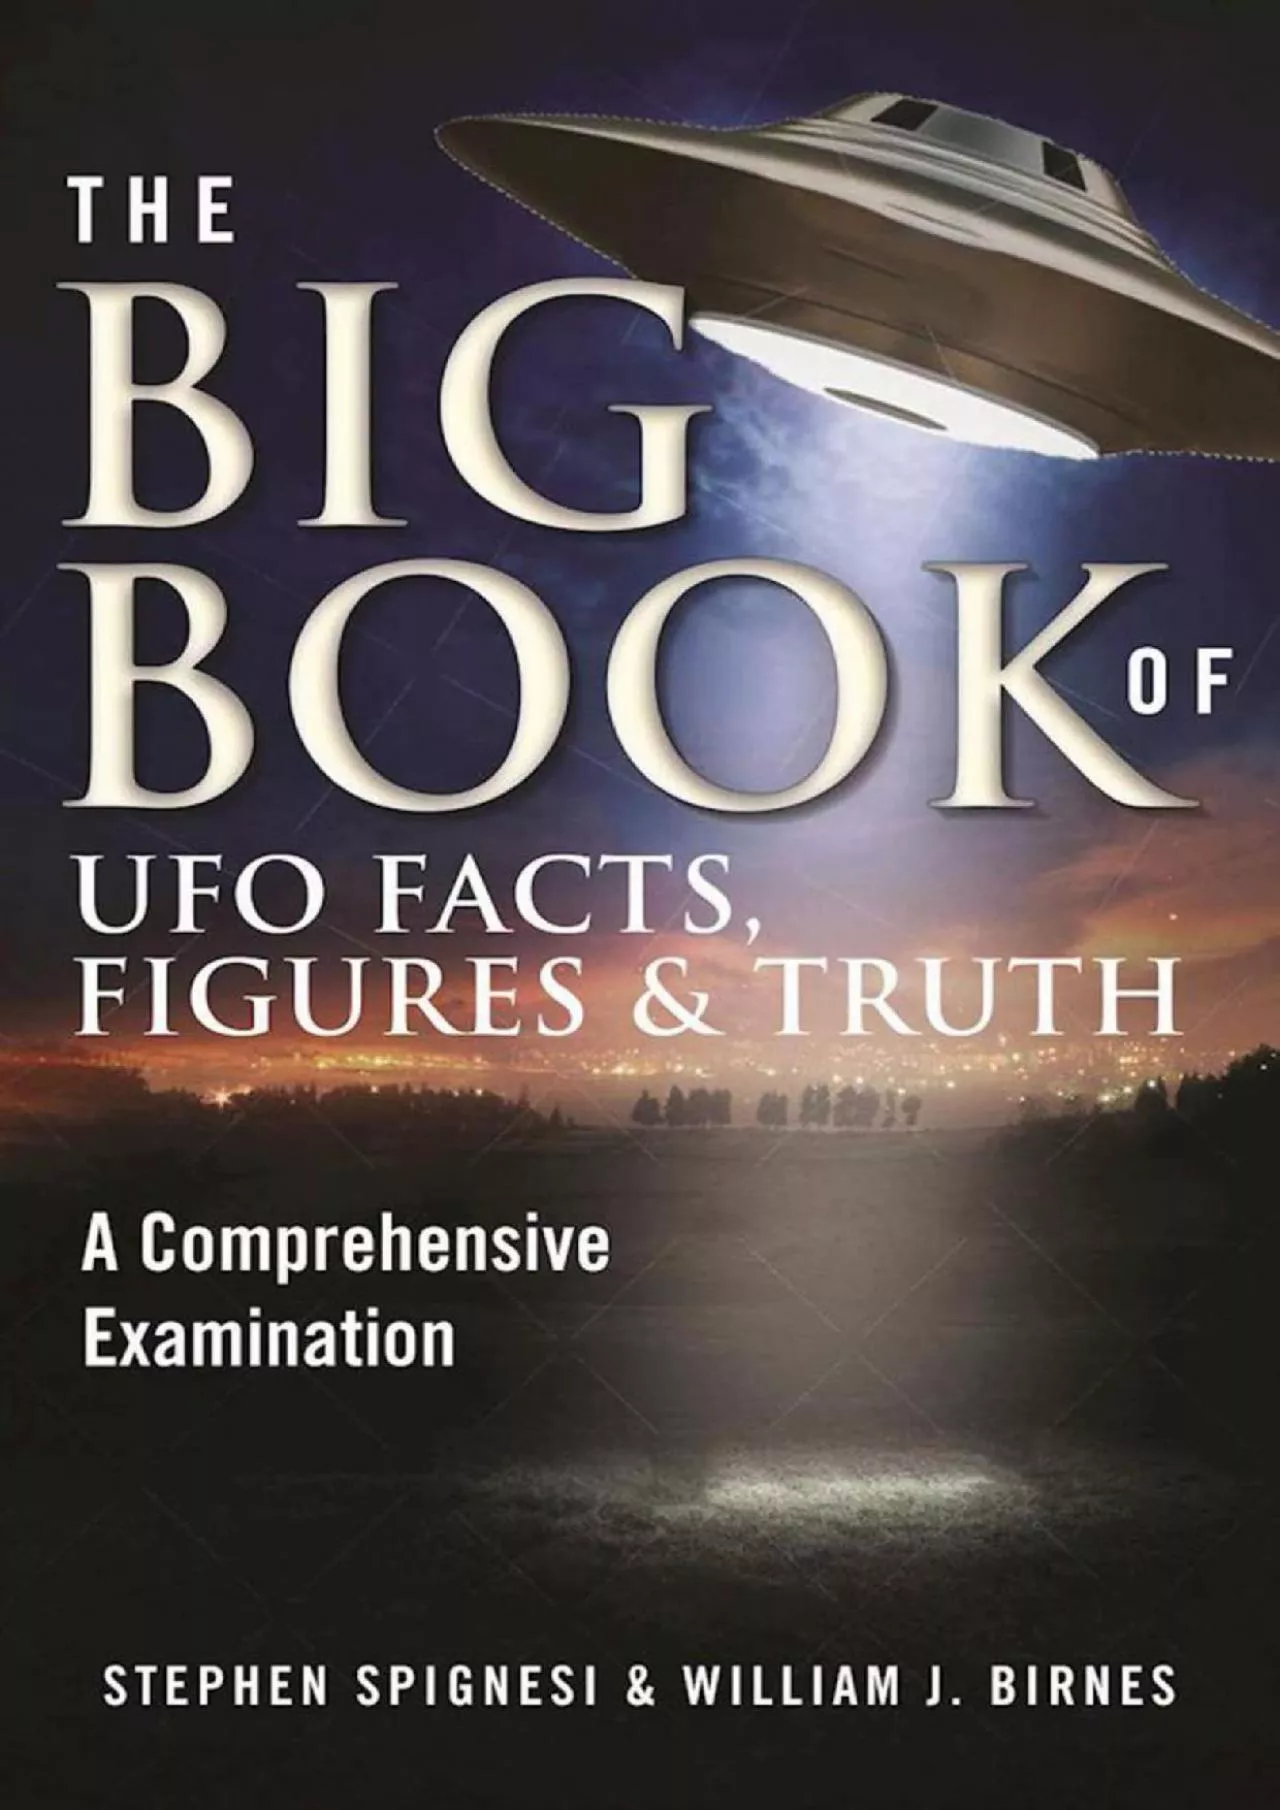 (BOOS)-The Big Book of UFO Facts, Figures & Truth: A Comprehensive Examination